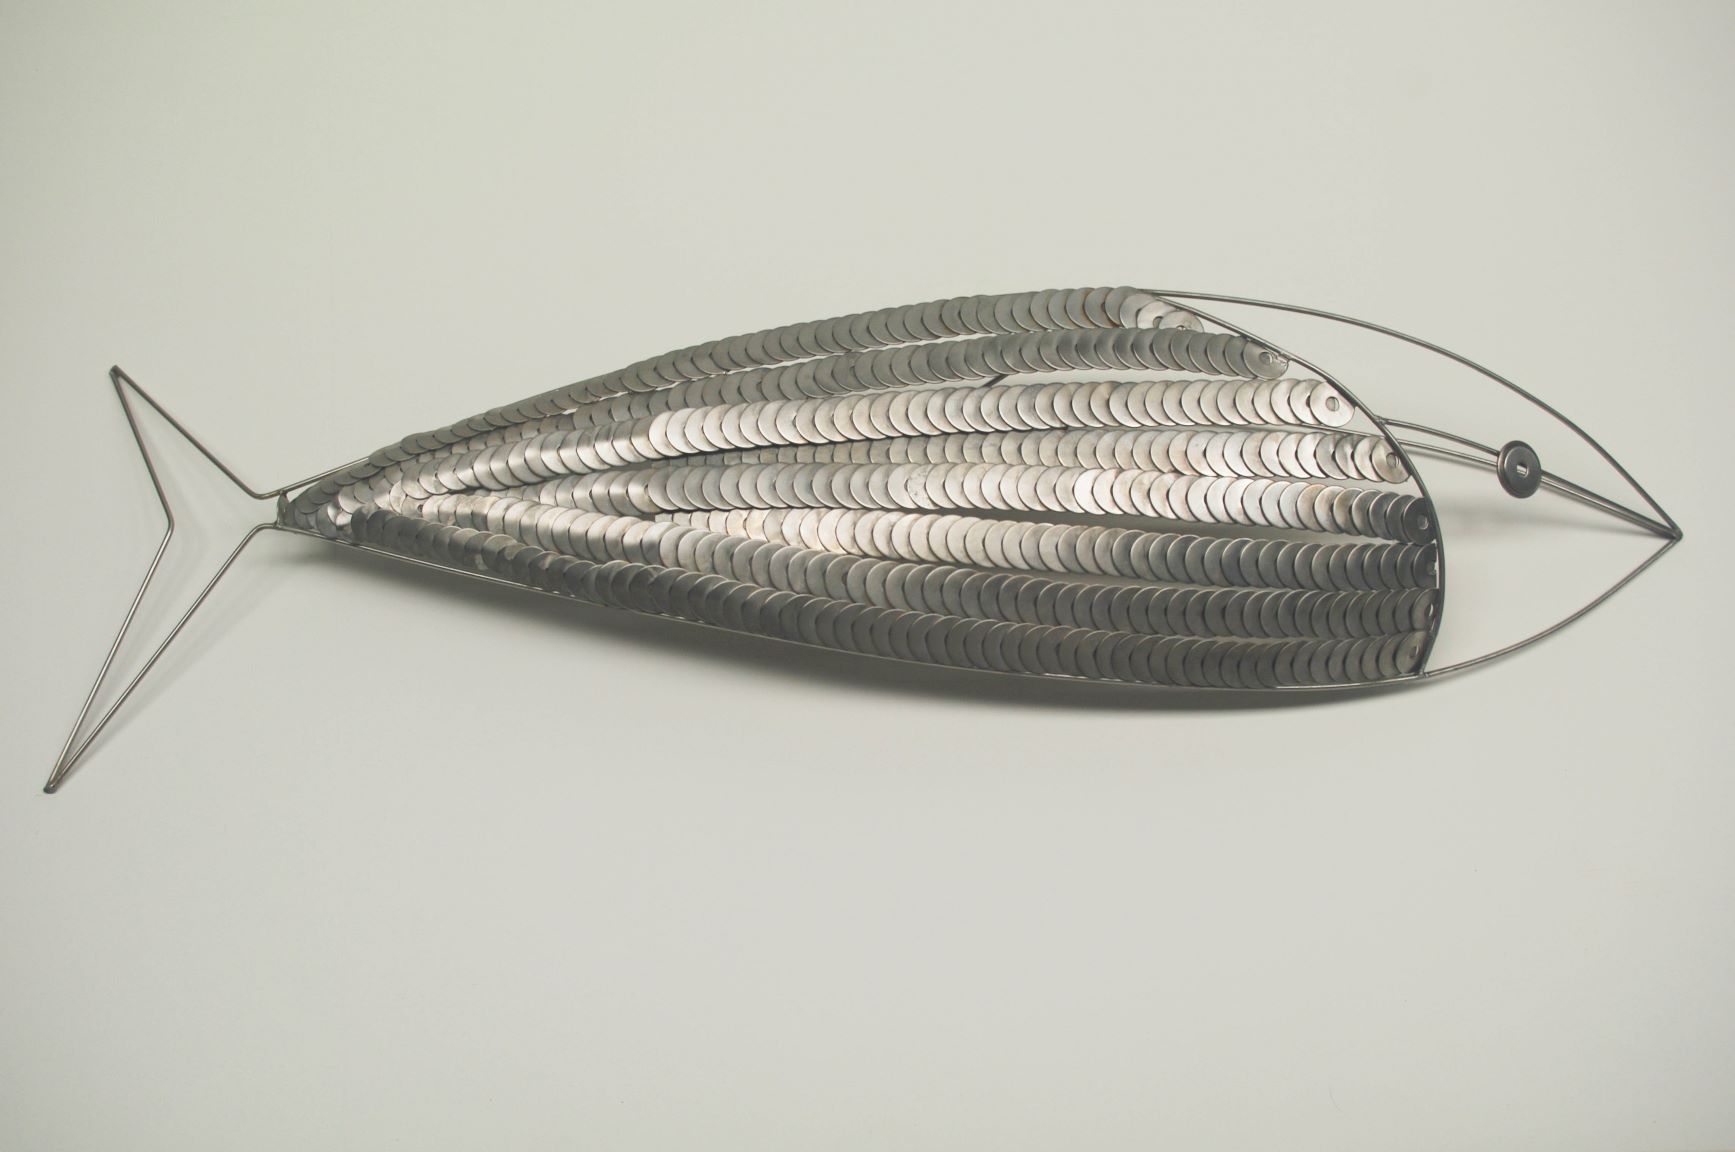 Stainless steel fish made from a lot of washers.